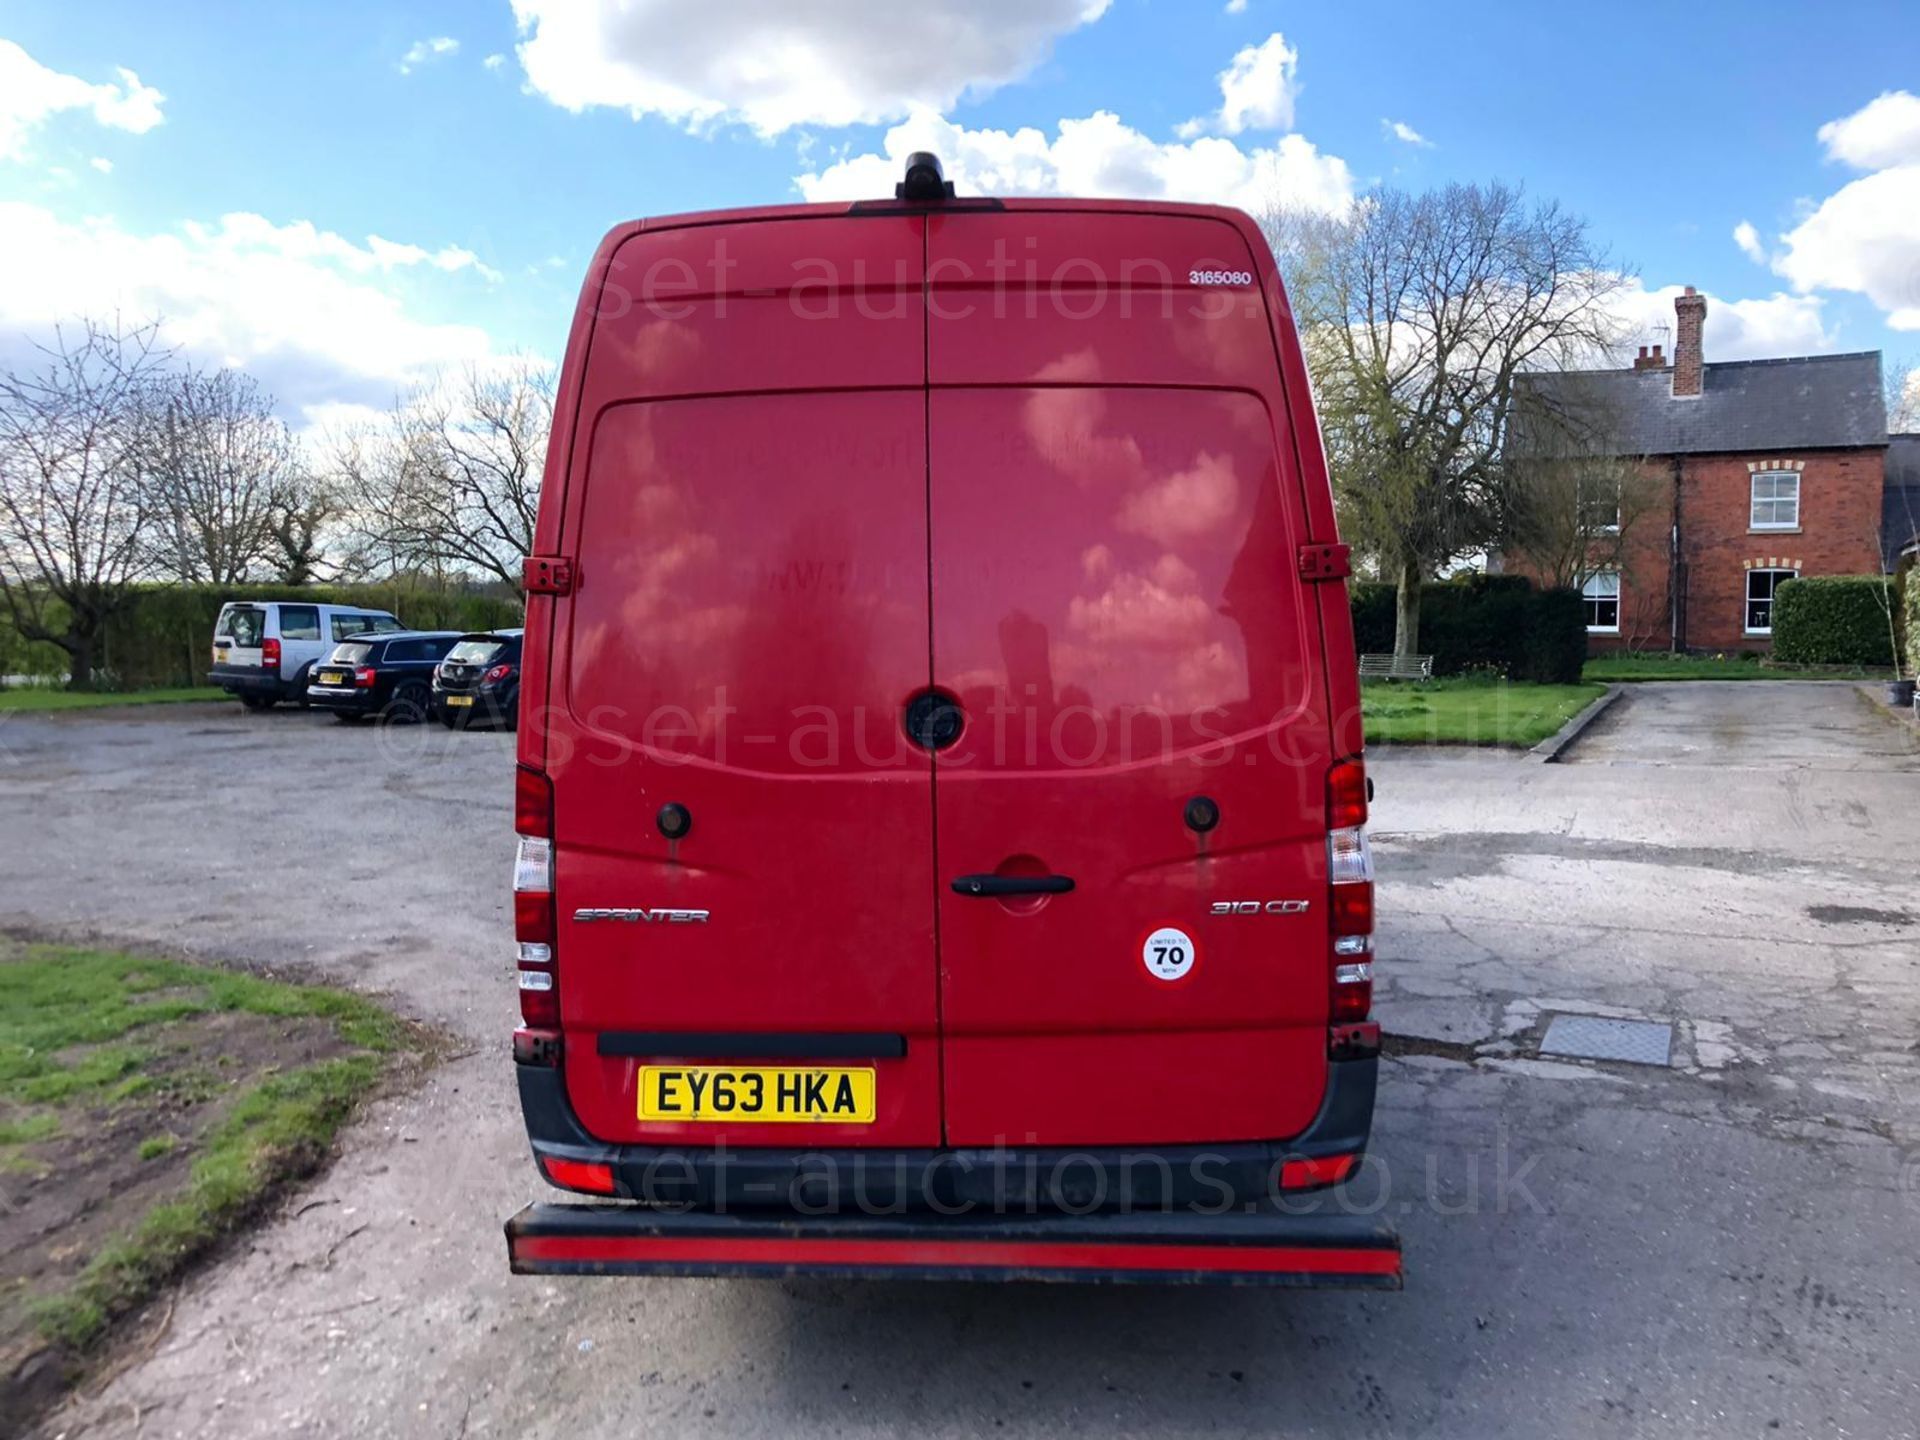 2013 MERCEDES-BENZ SPRINTER 310 CDI, DIESEL ENGINE, SHOWING 0 PREVIOUS KEEPERS *PLUS VAT* - Image 6 of 12